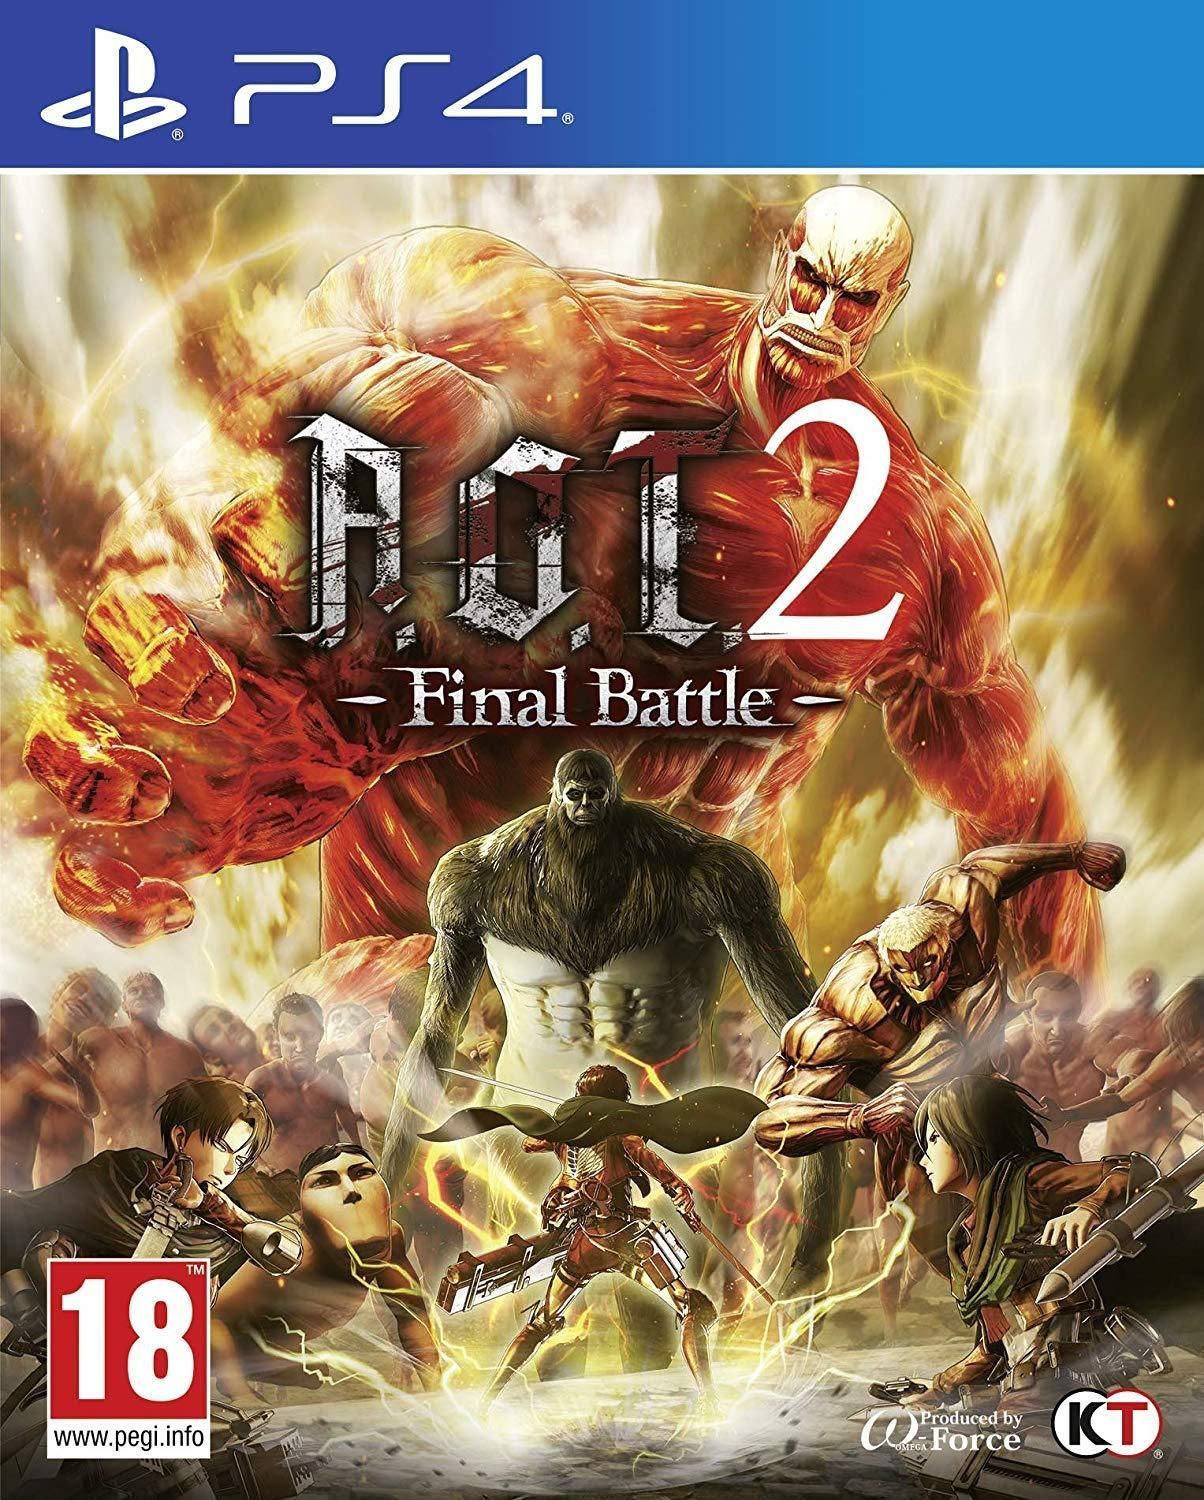 canal puño marioneta Attack on Titan 2: Final Battle - Videojuego (PS4, Switch, PC y Xbox One) -  Vandal